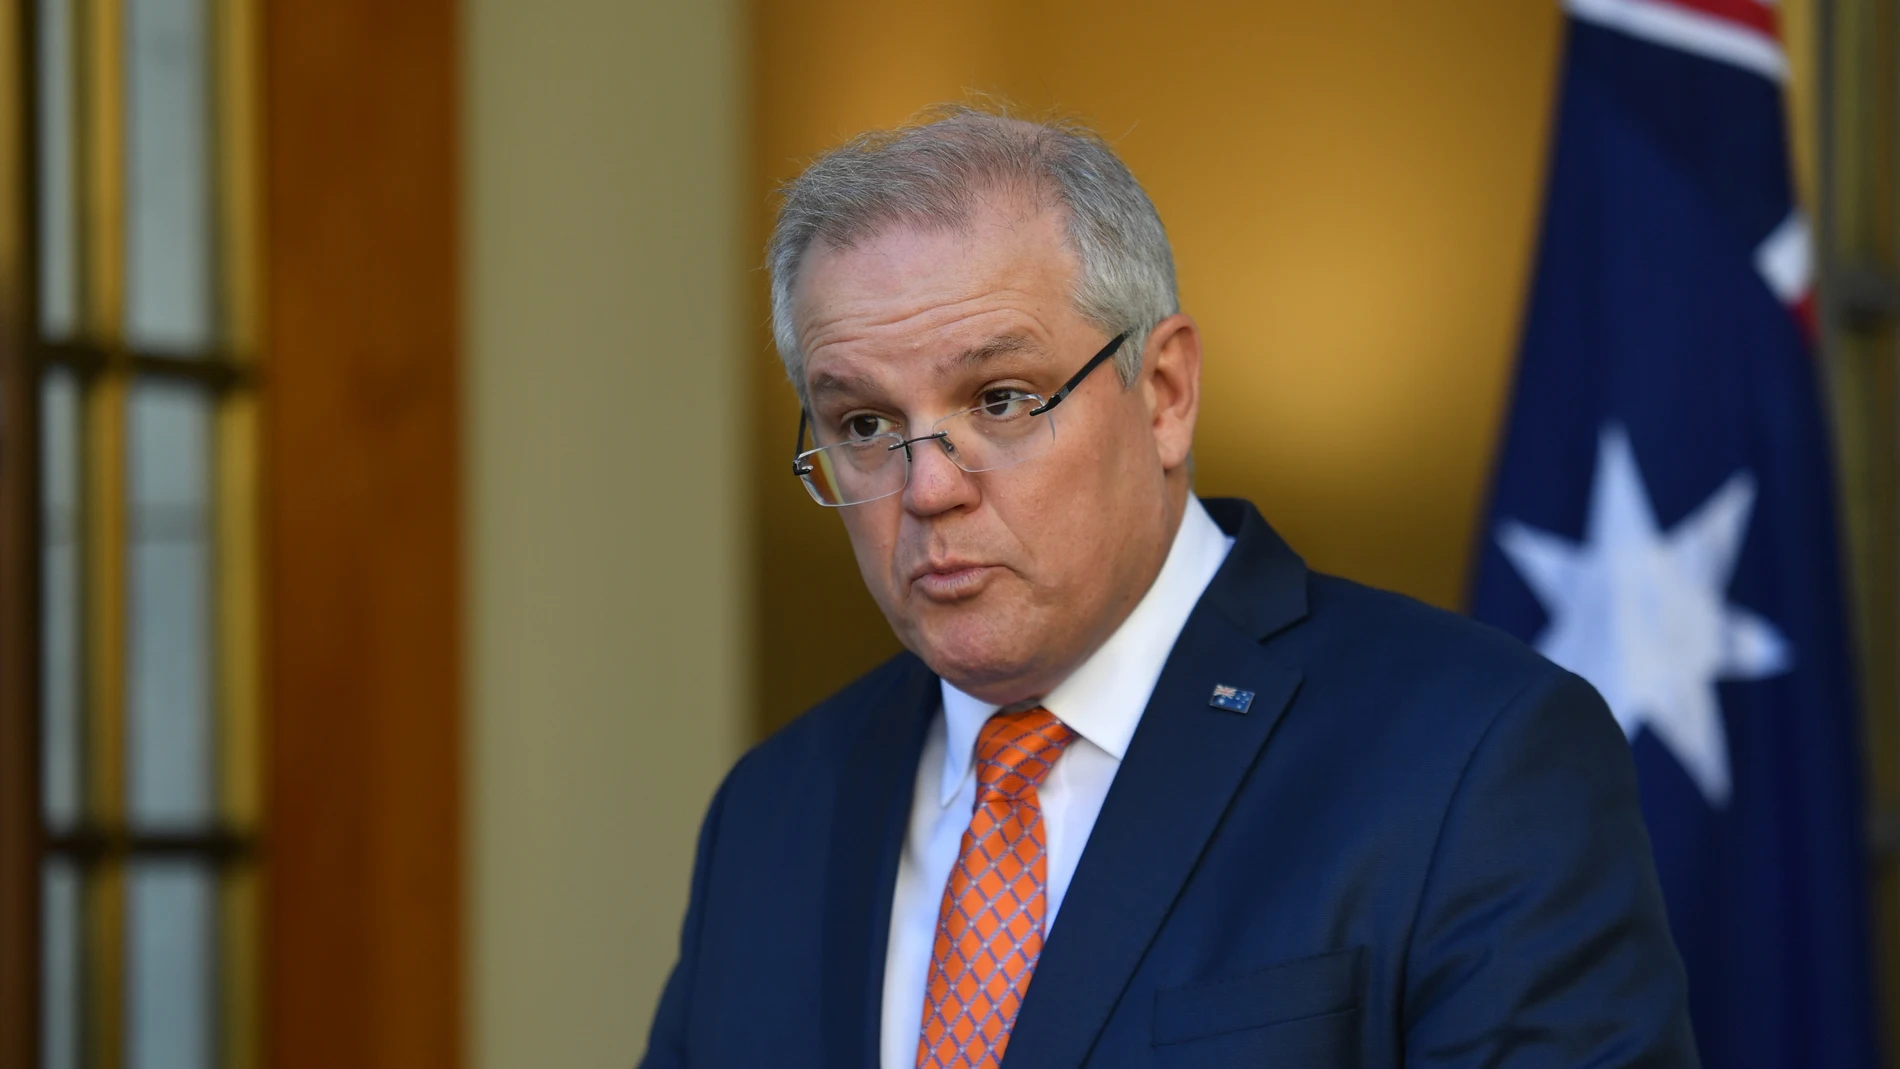 Prime Minister Scott Morrison at a press conference at Parliament House in Canberra, Thursday, July 9, 2020. (AAP Image/Mick Tsikas) NO ARCHIVING